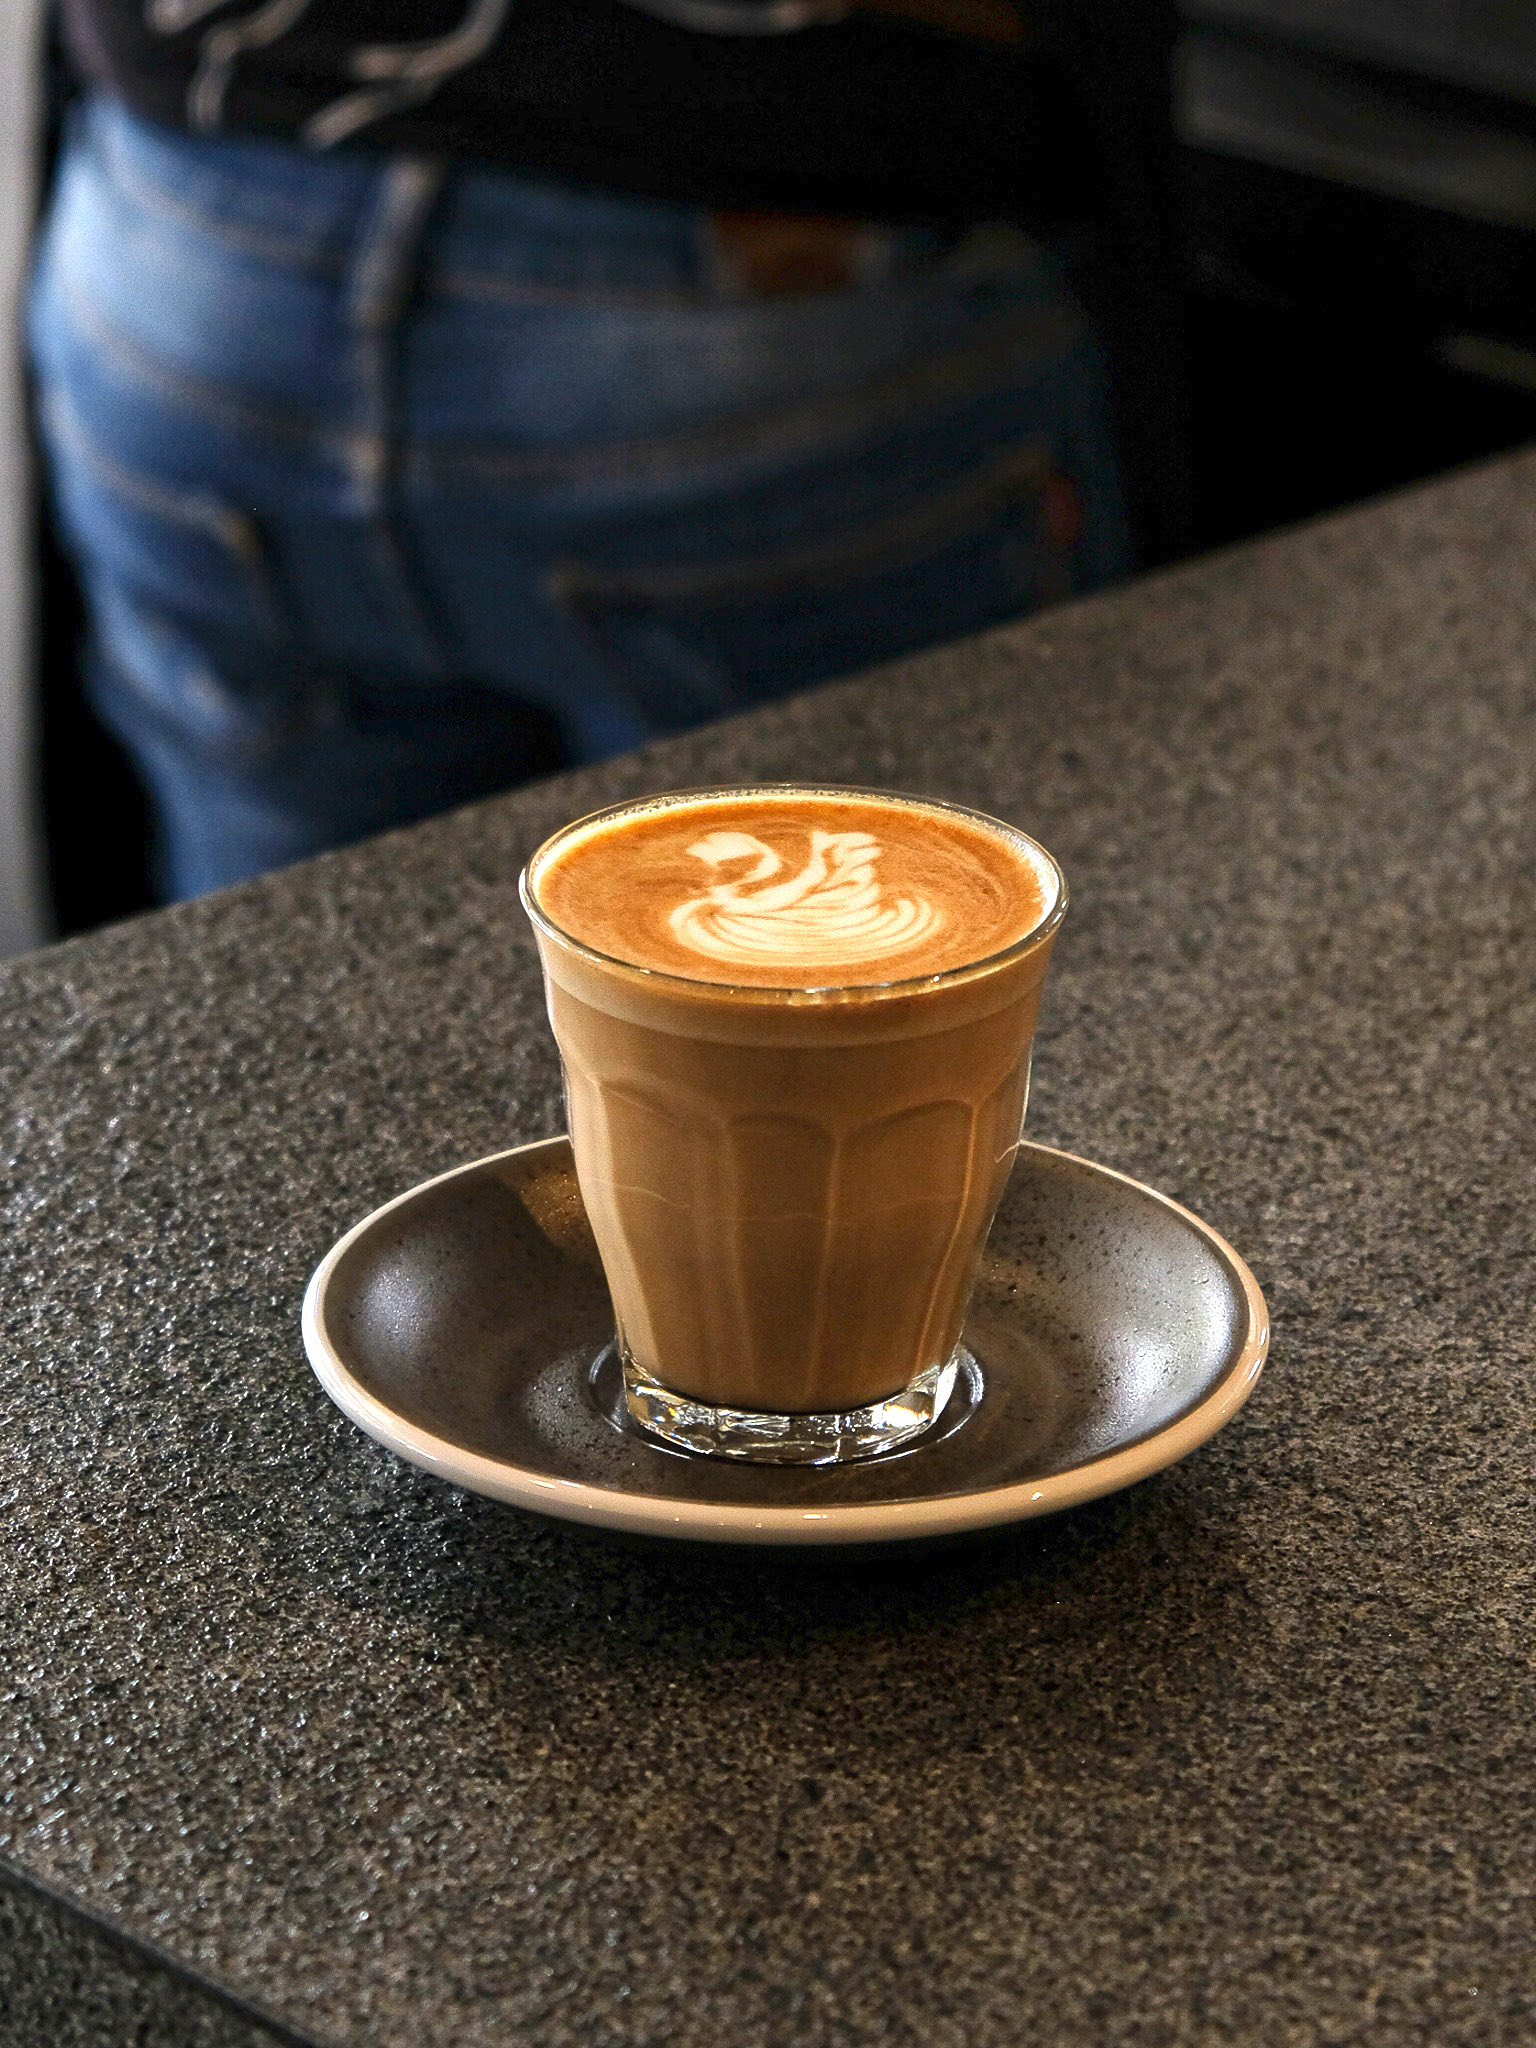 Expect both coffee and non-coffee drinks at The Black Bean